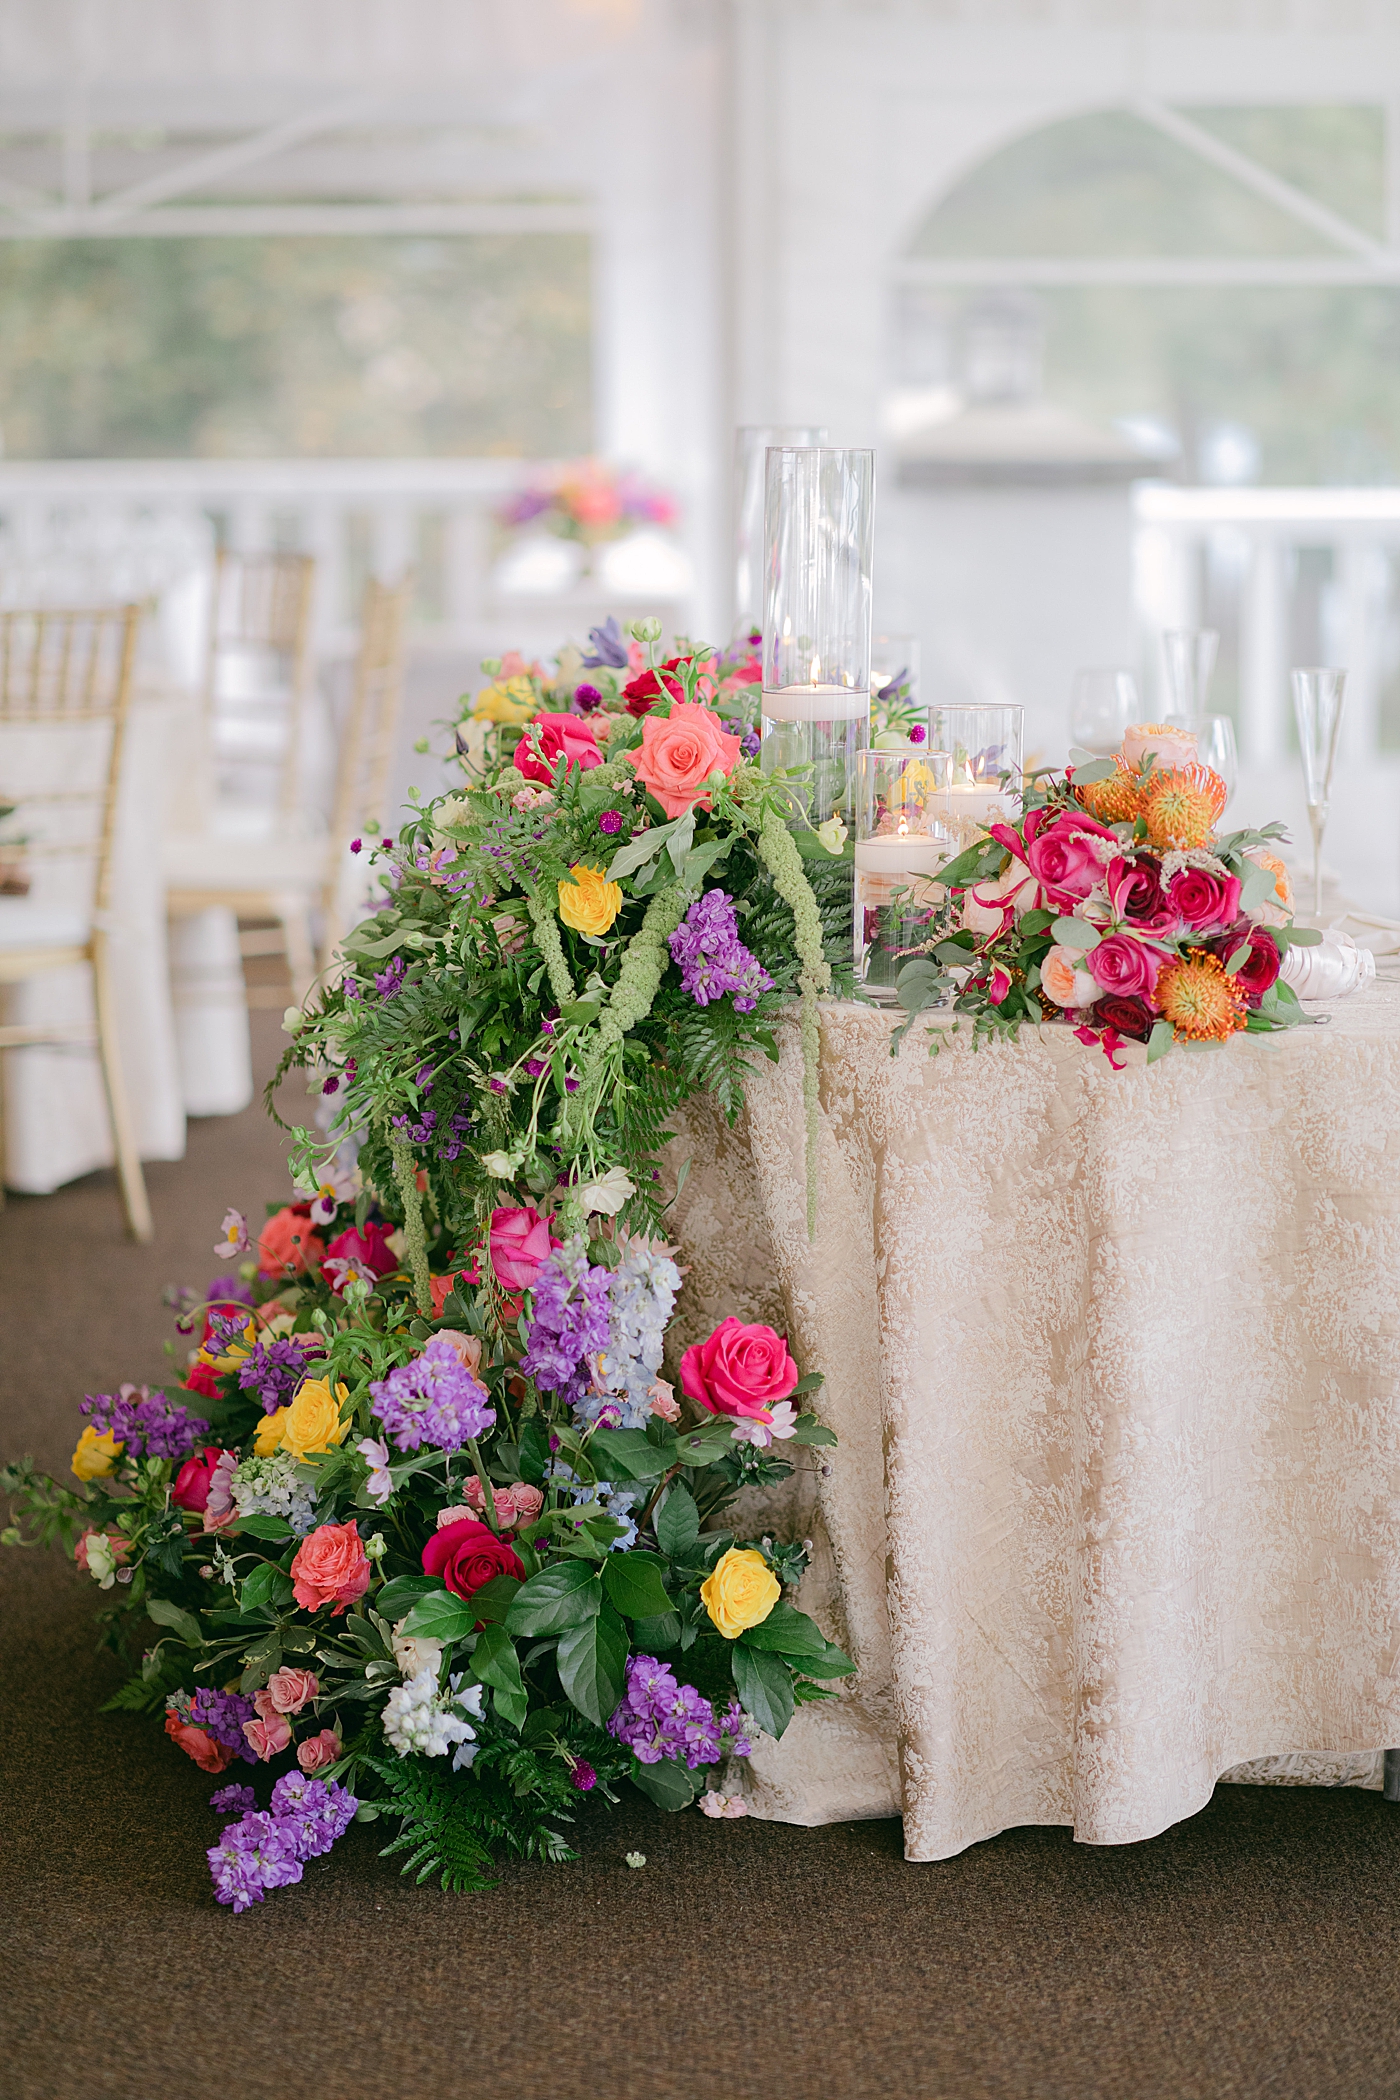 Reception table details during Sagamore Wedding | Image by Hope Helmuth Photography